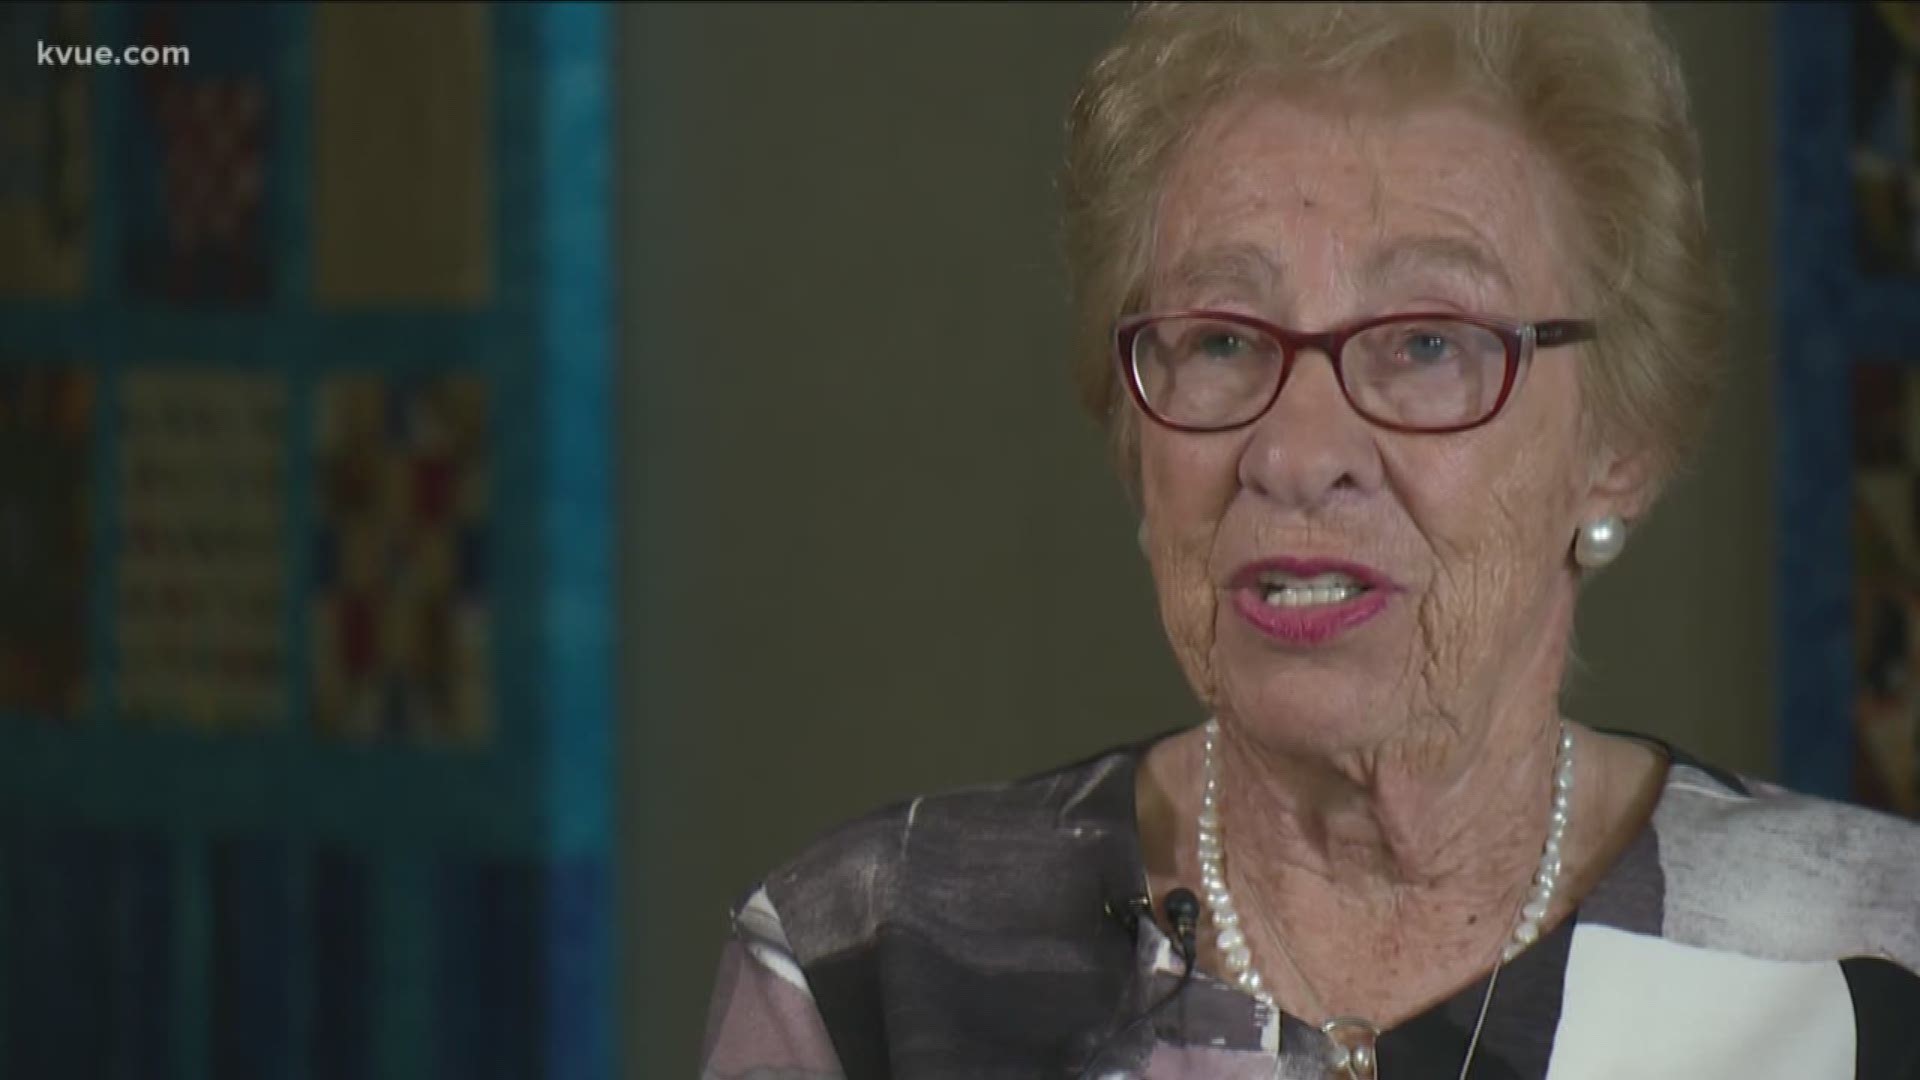 A holocaust survivor will finish up her tour in Austin later today. She's been going around the country talking about her scary - but powerful - experience.